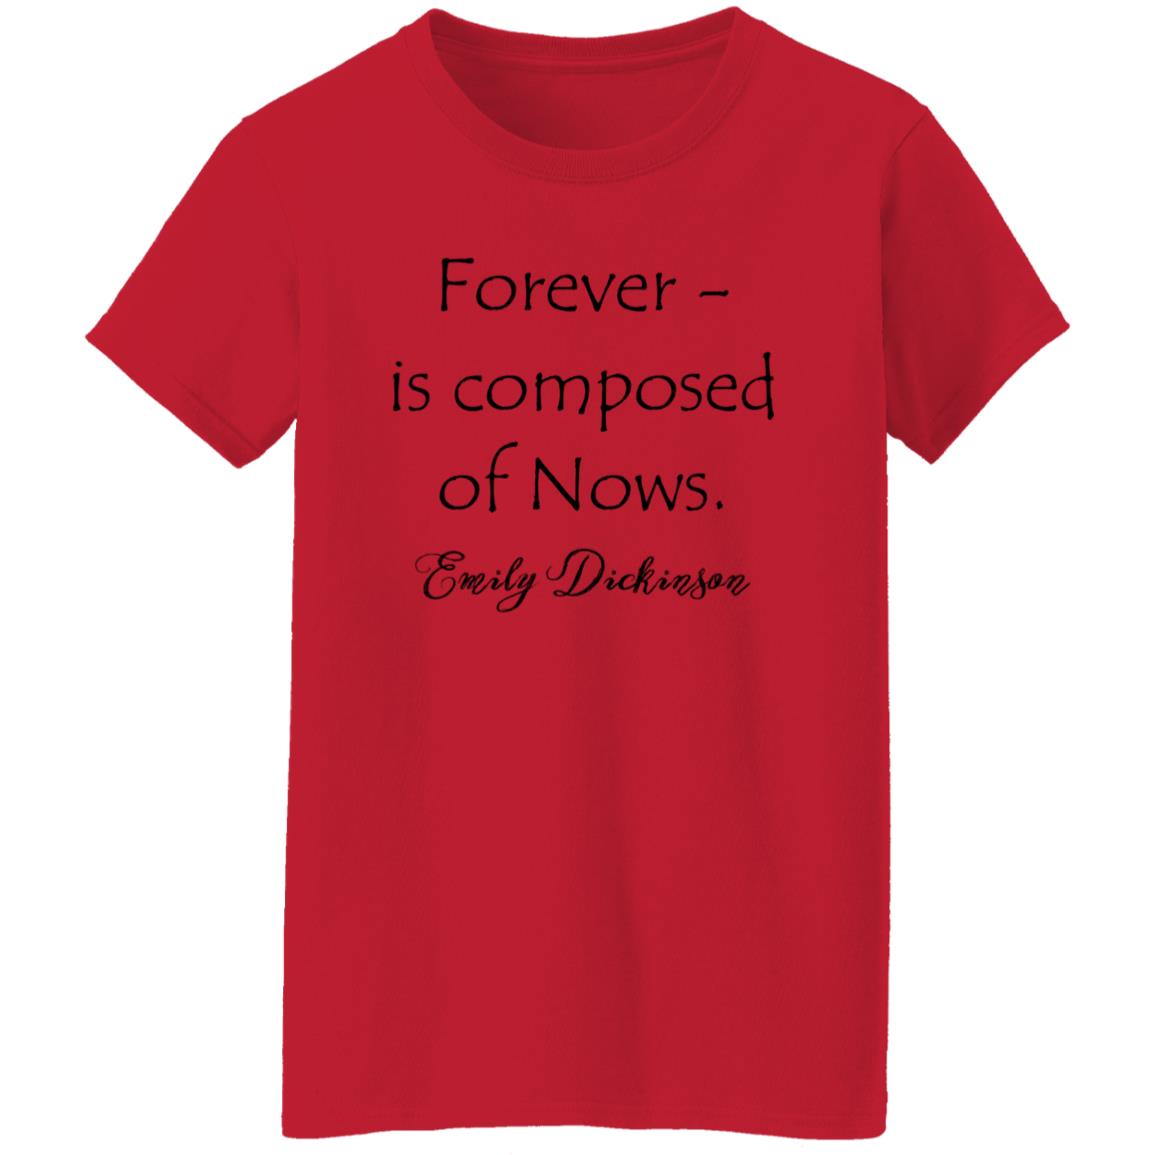 Emily Dickinson Forever - is composed of Nows. T-Shirt